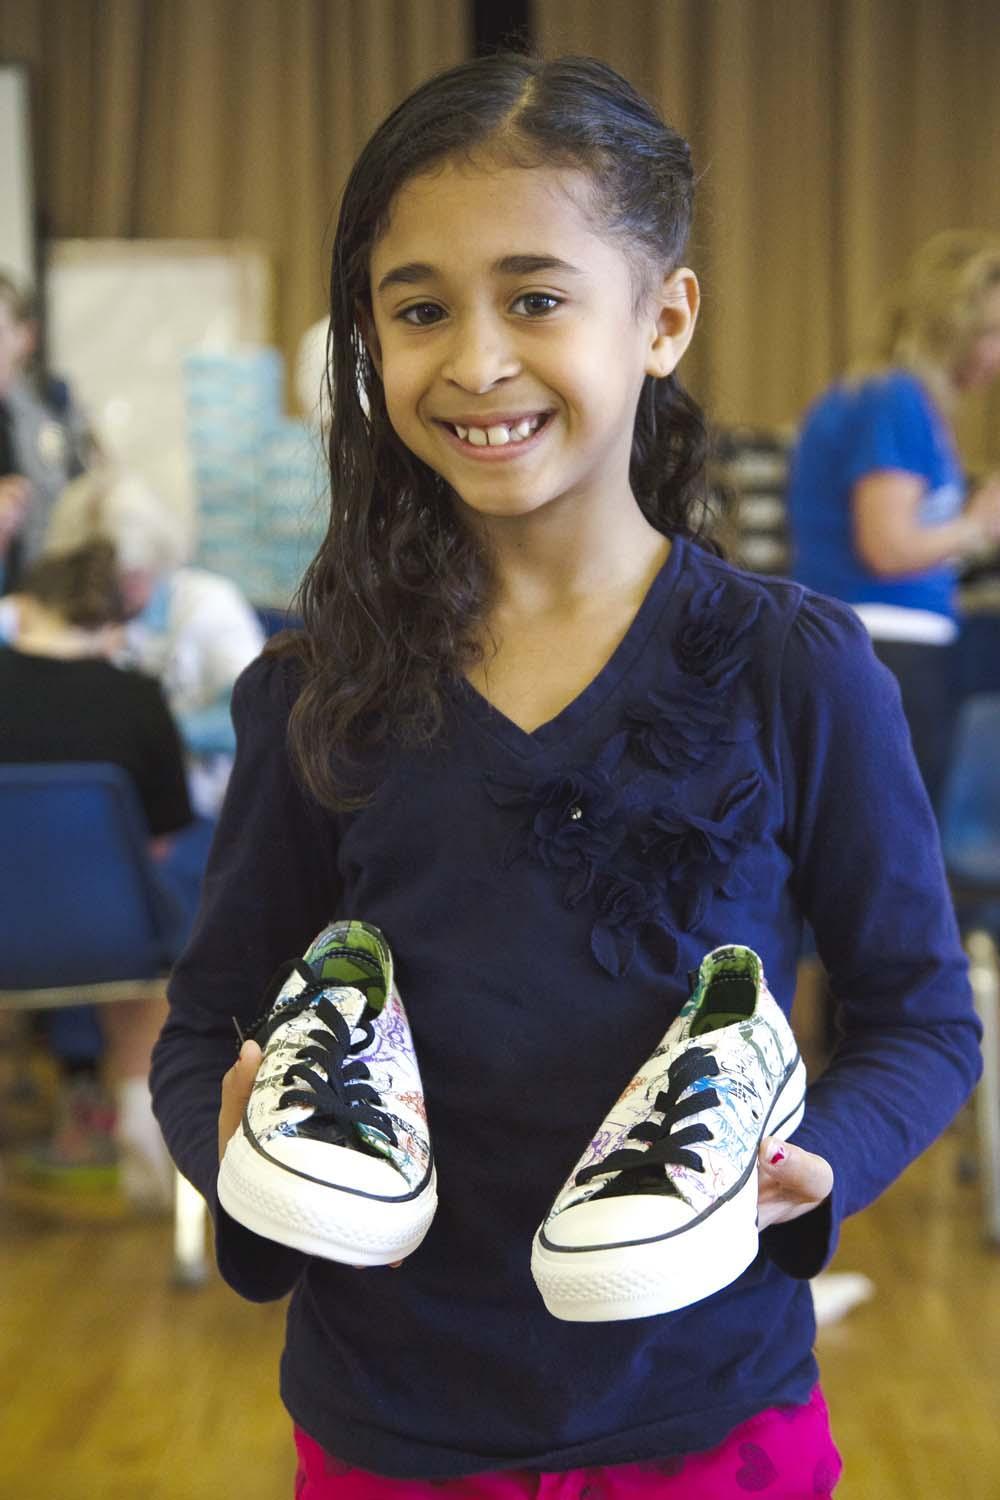 Short-term Relief Your used shoes today, help provide new shoes tomorrow! Soles4Souls generates funds from selling gently-worn shoes, keeping our organization sustainable too!